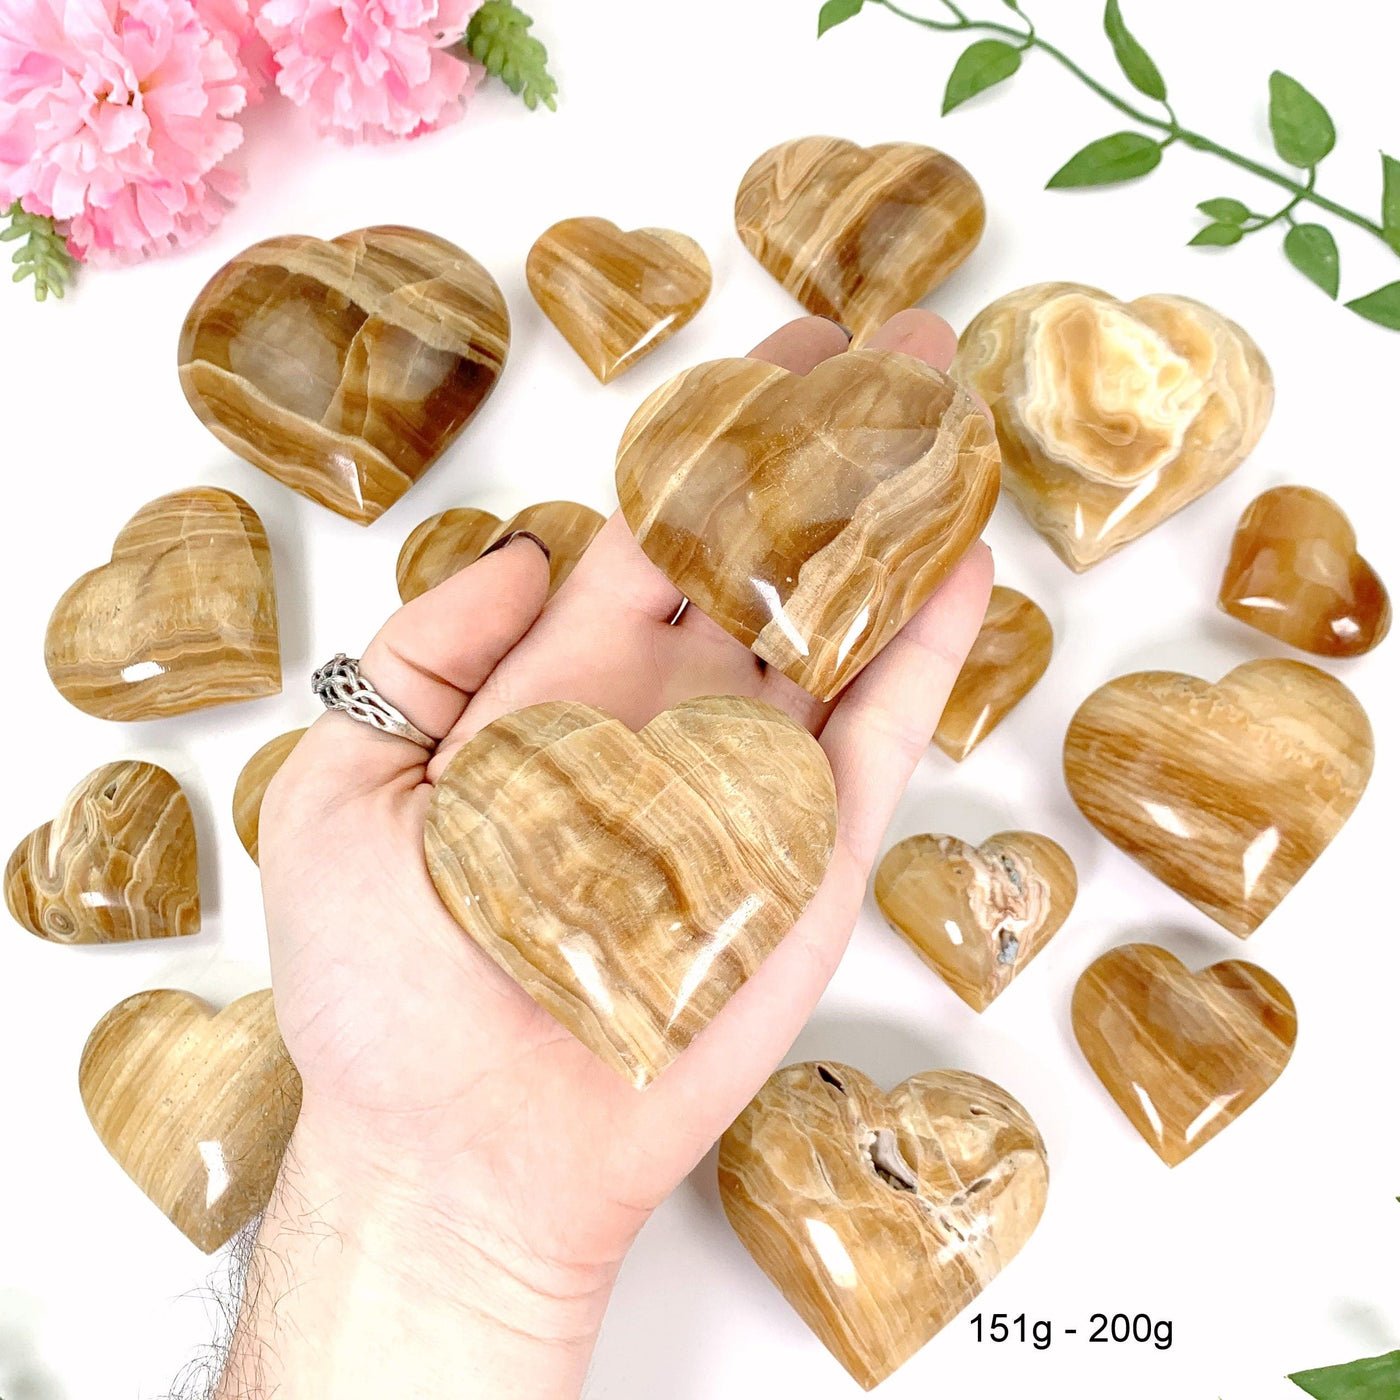 2 151 gram - 200 gram hearts in hand with a white background